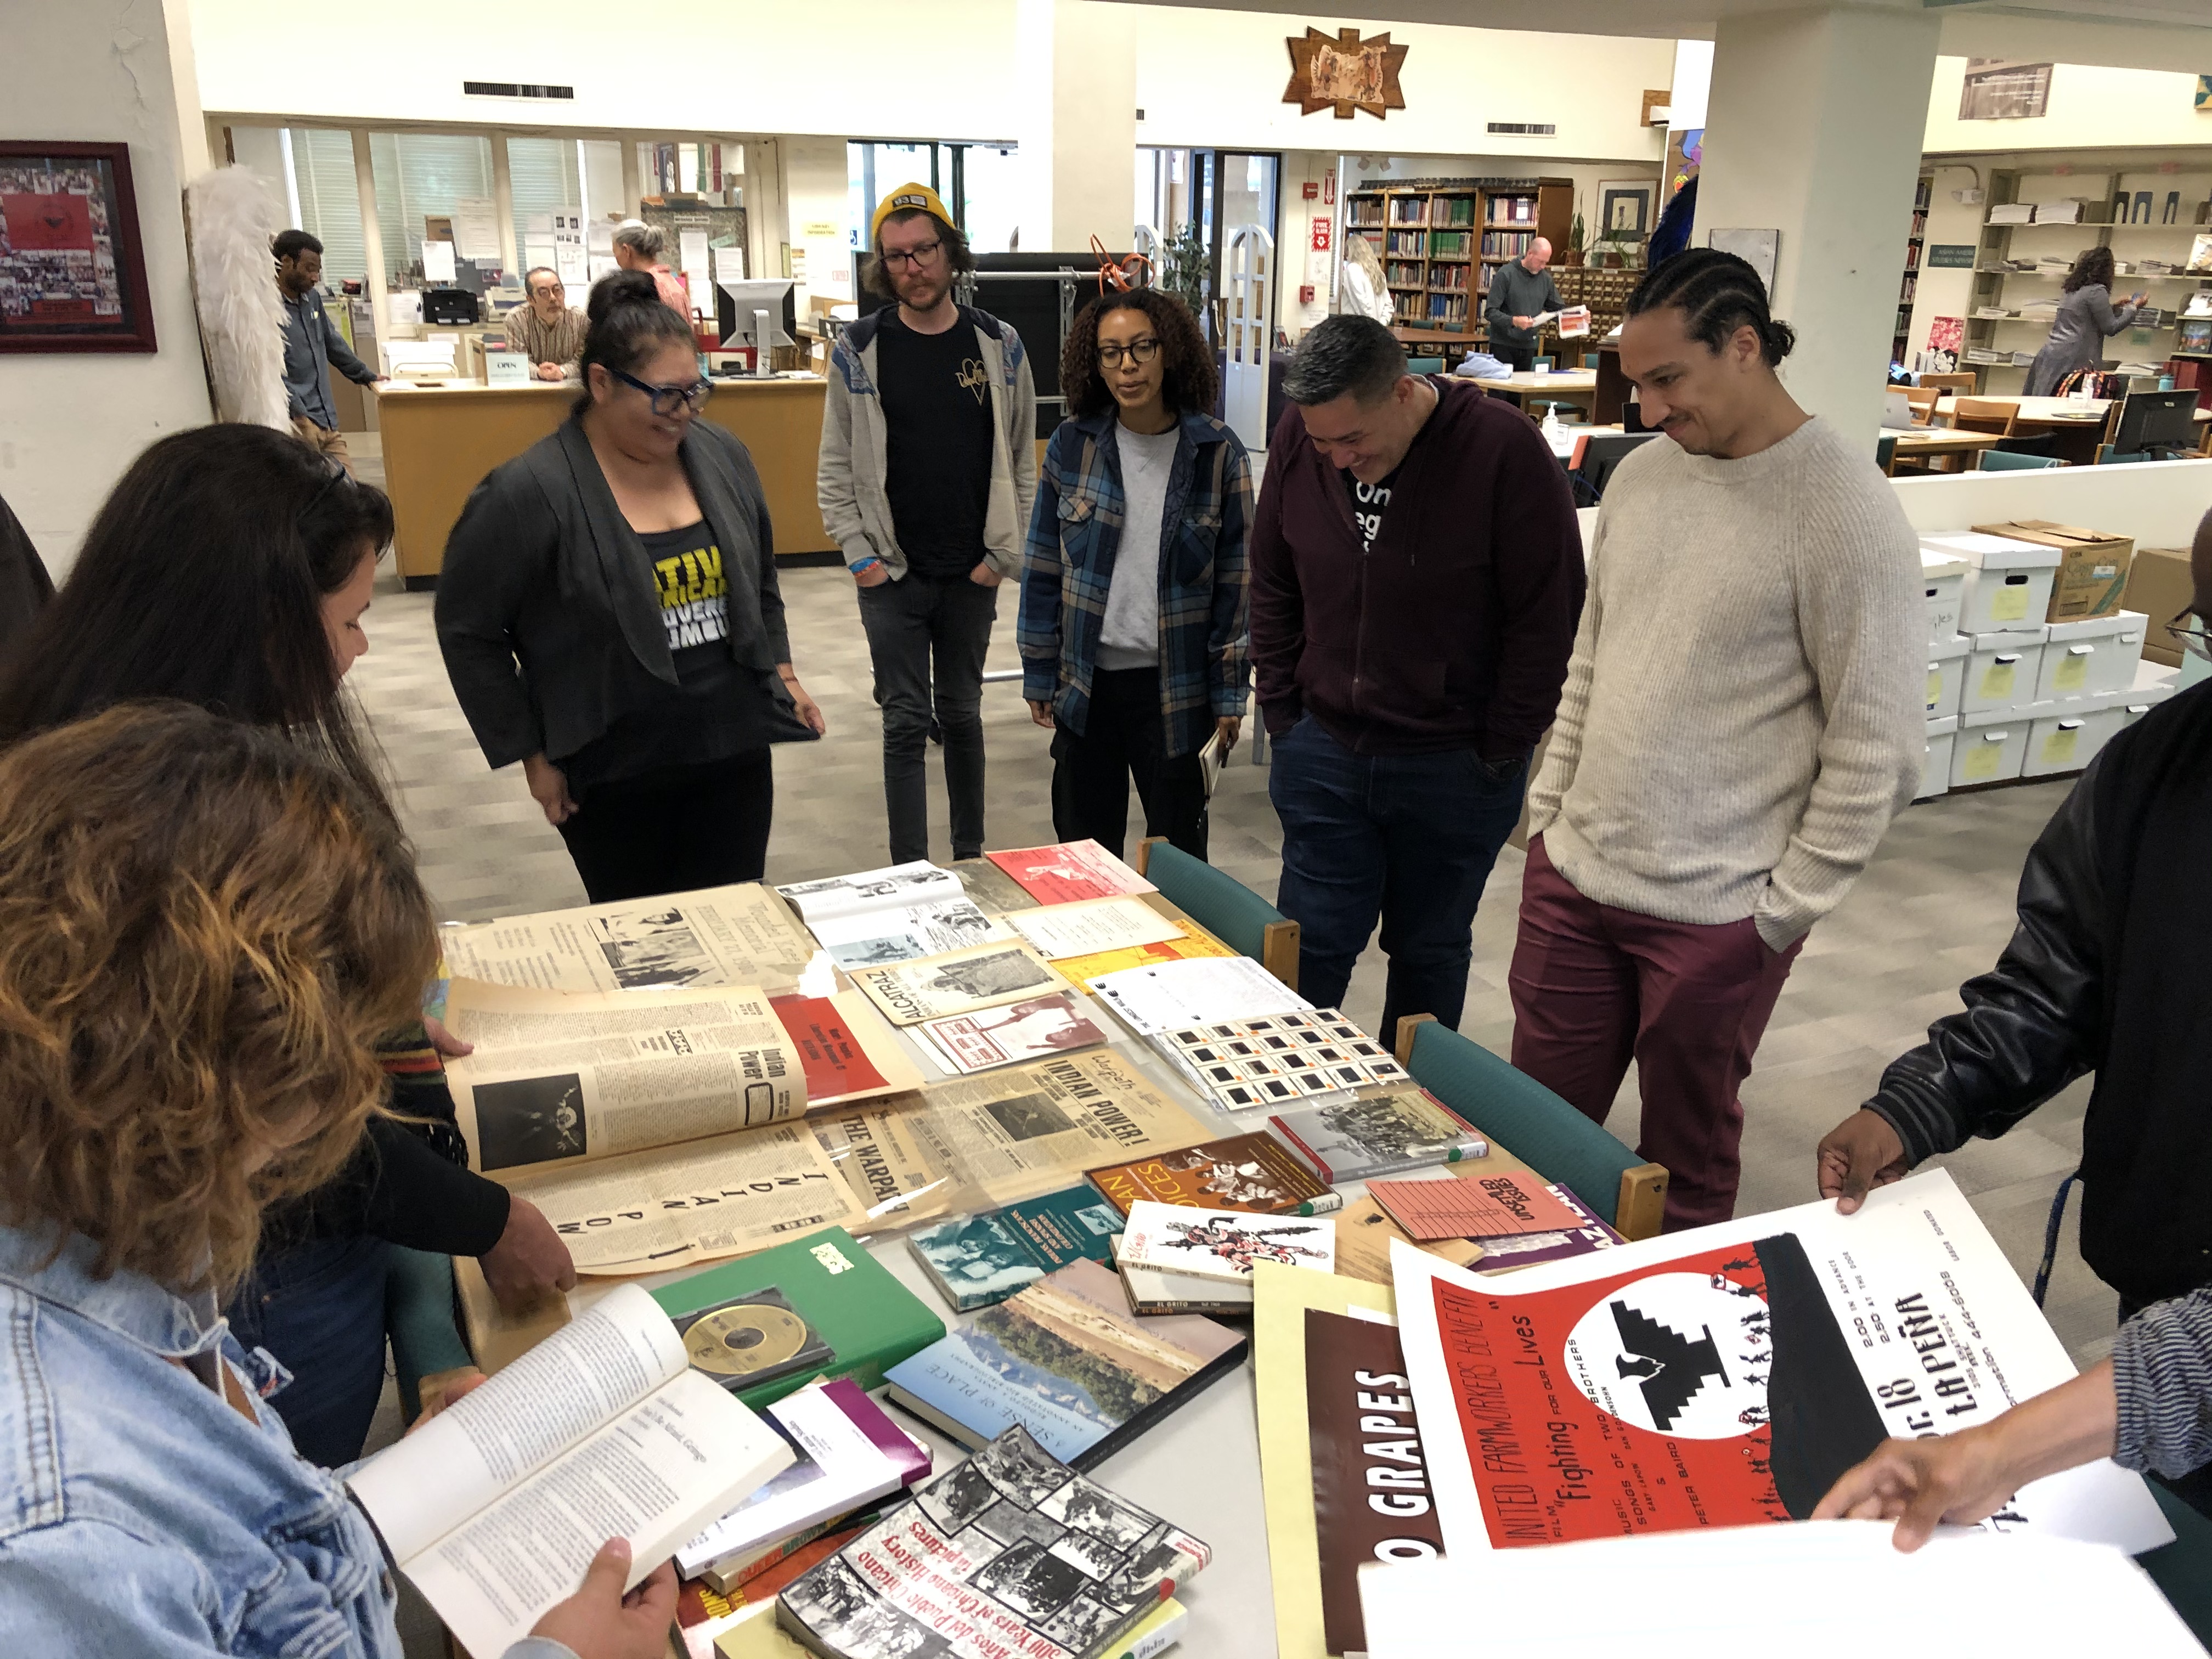 A diverse group of teachers look at a table of materials from UC Berkeley's ethnic studies archive